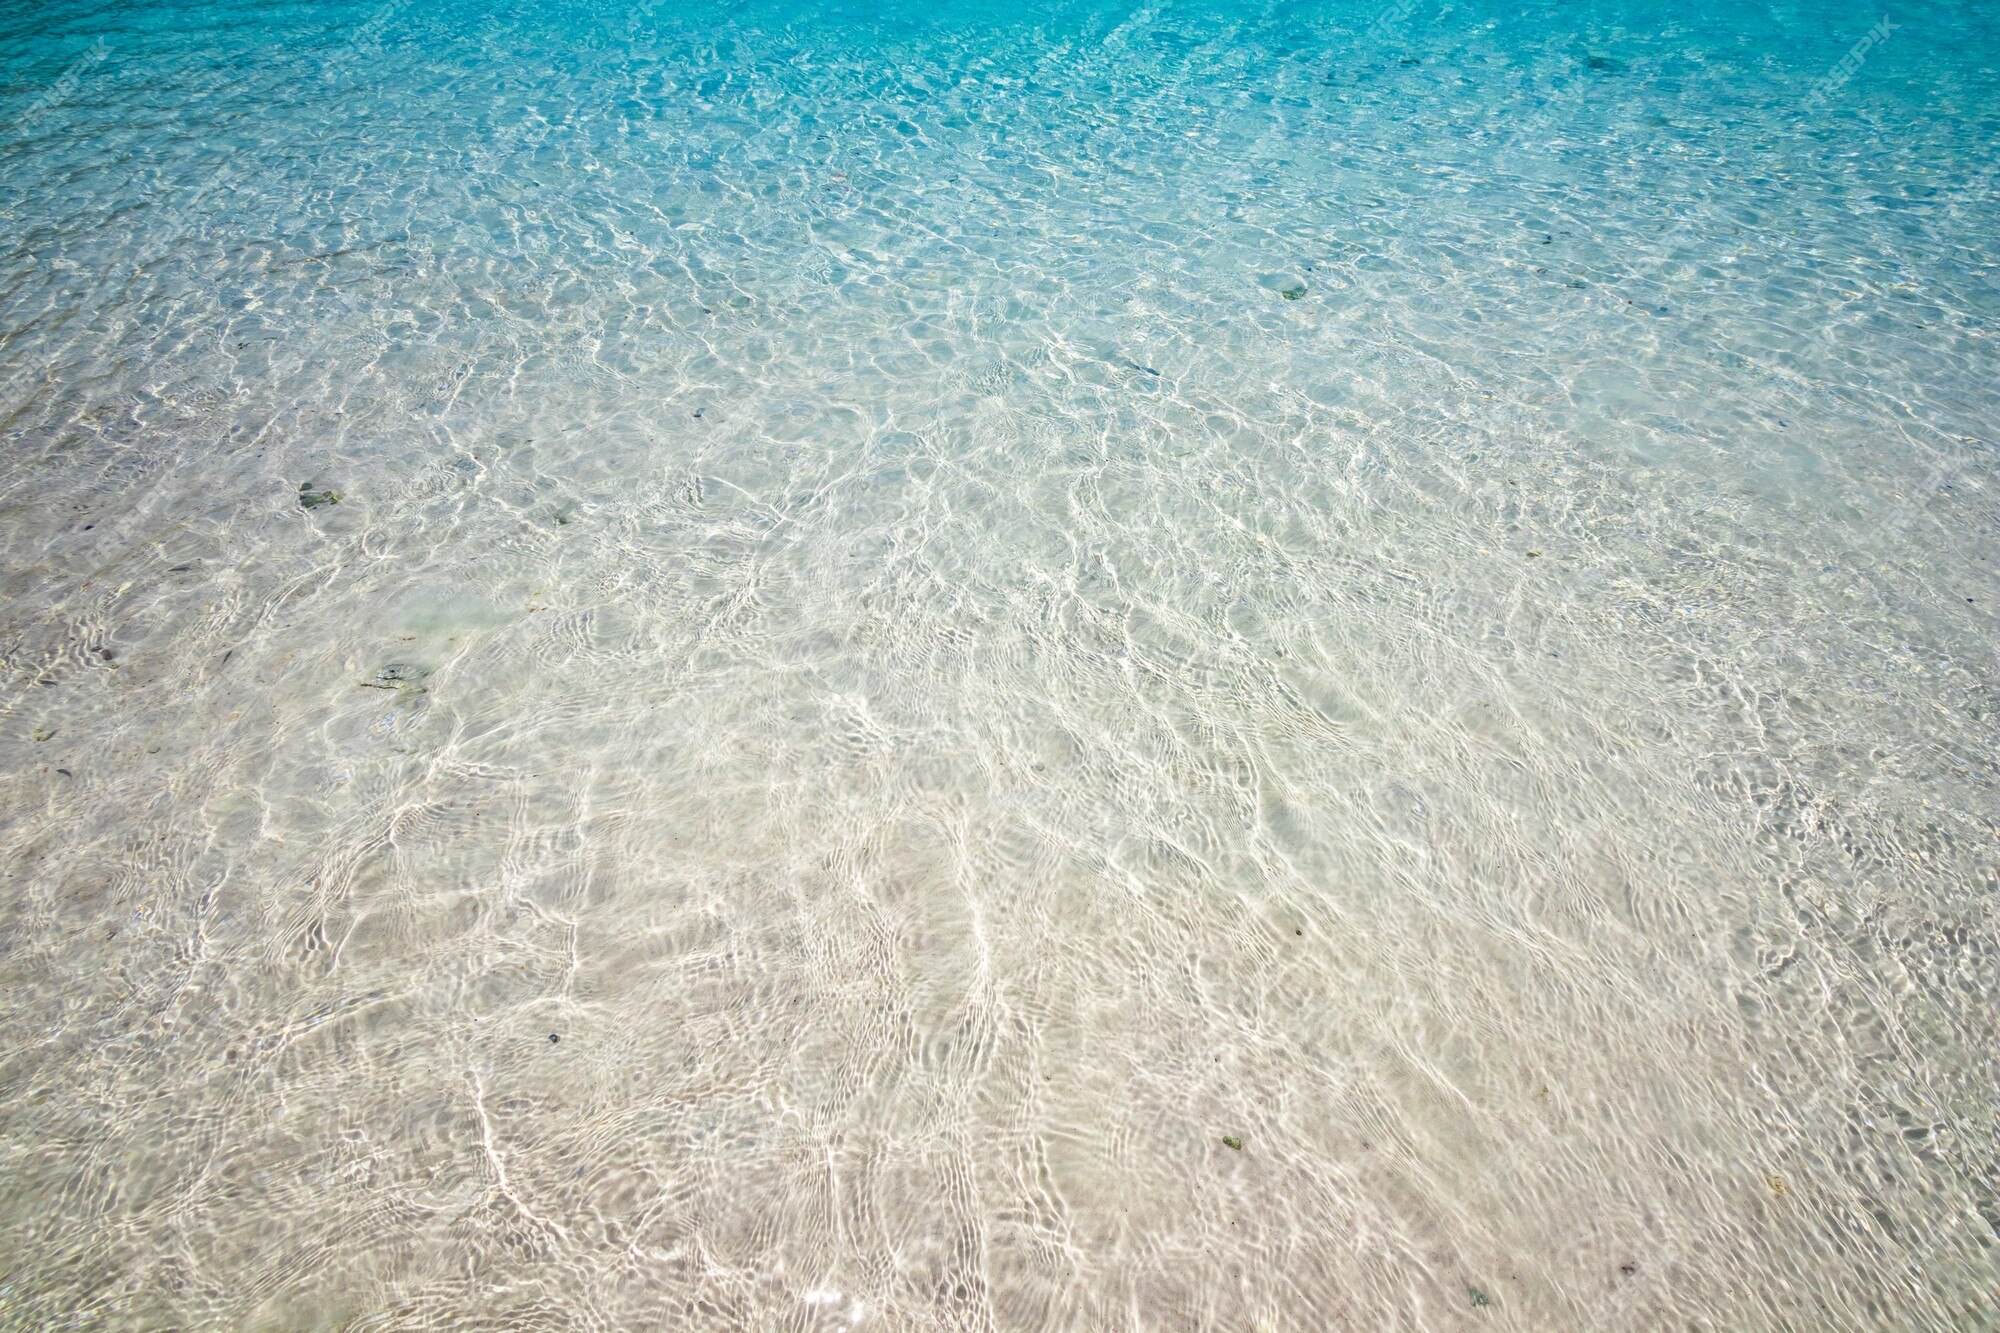 Why Some Beaches Have Clear Blue Water and Others Are Gray